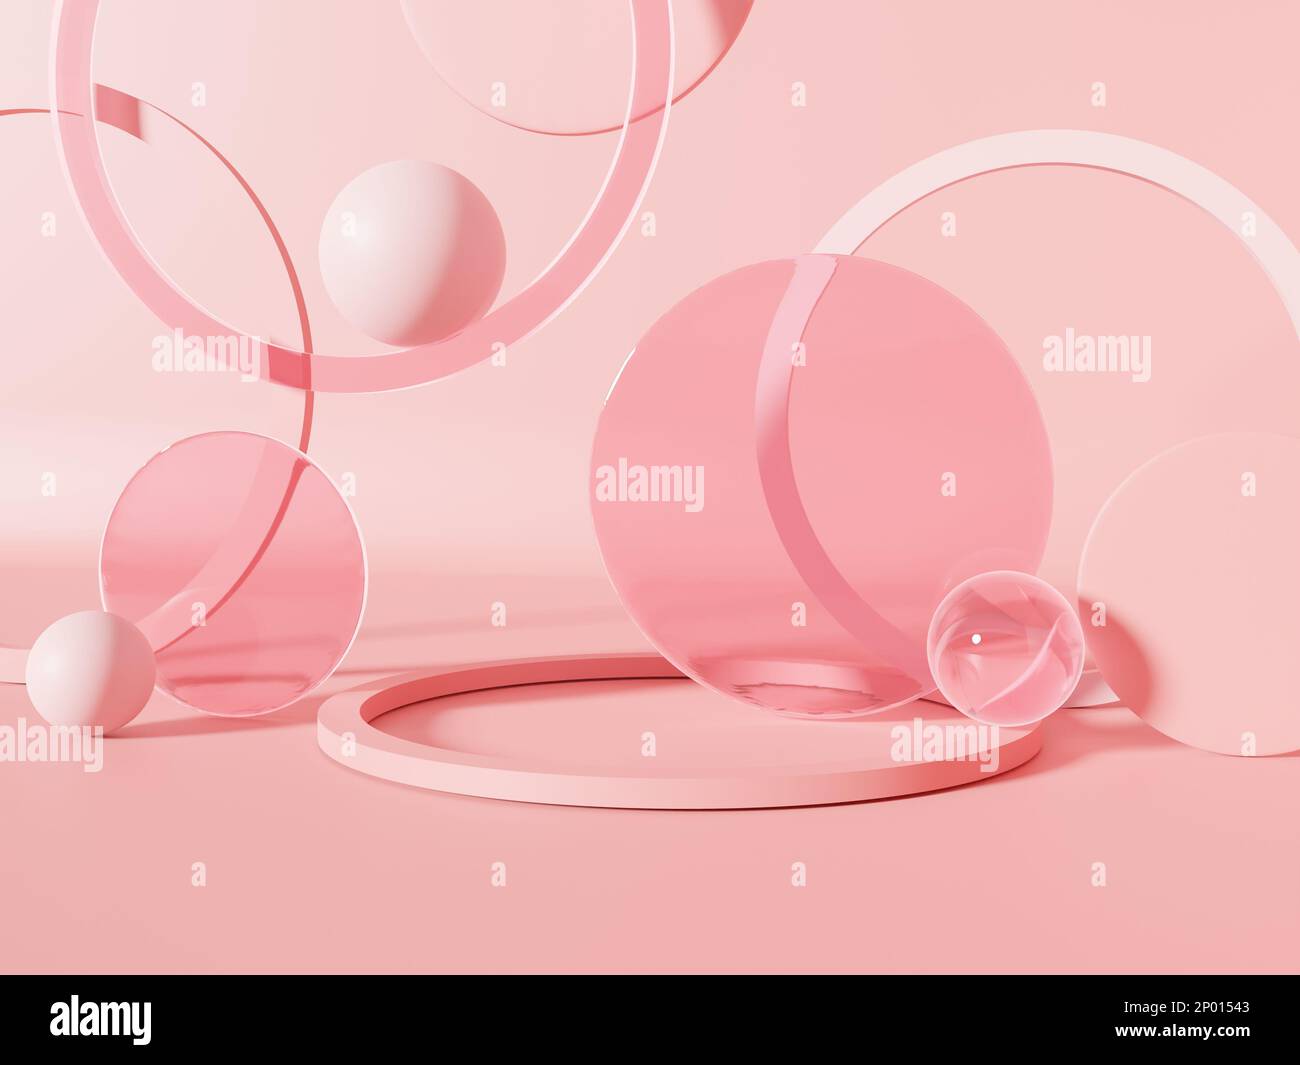 3D Rendering Studio Shot Product Display Background with Transparent Pink  Spheres, Plates and Rings for Beauty or Skincare Products Stock Photo -  Alamy